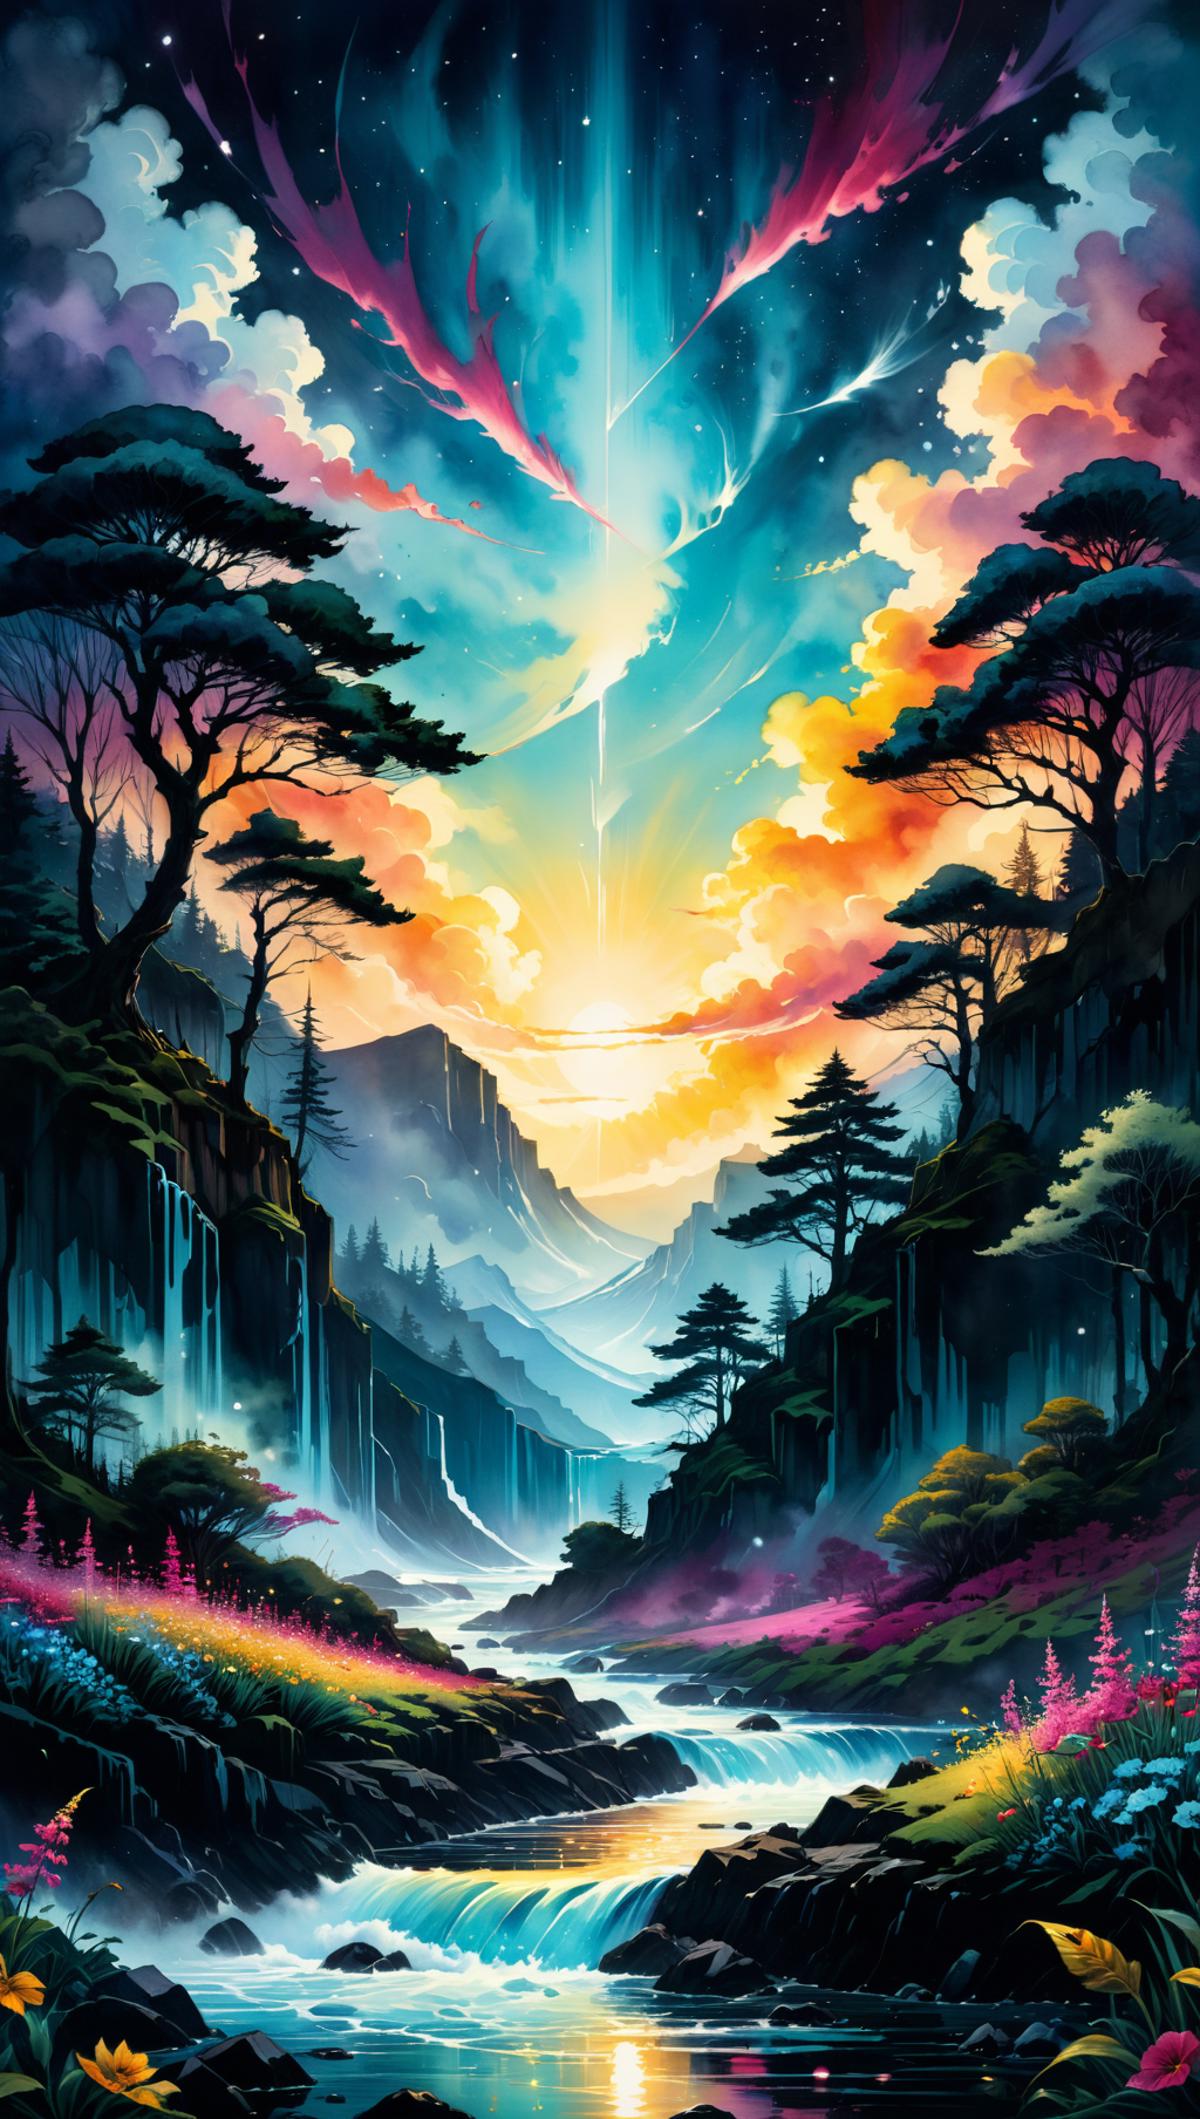 A breathtaking landscape painting with trees, mountains, and sunlight streaming through the clouds